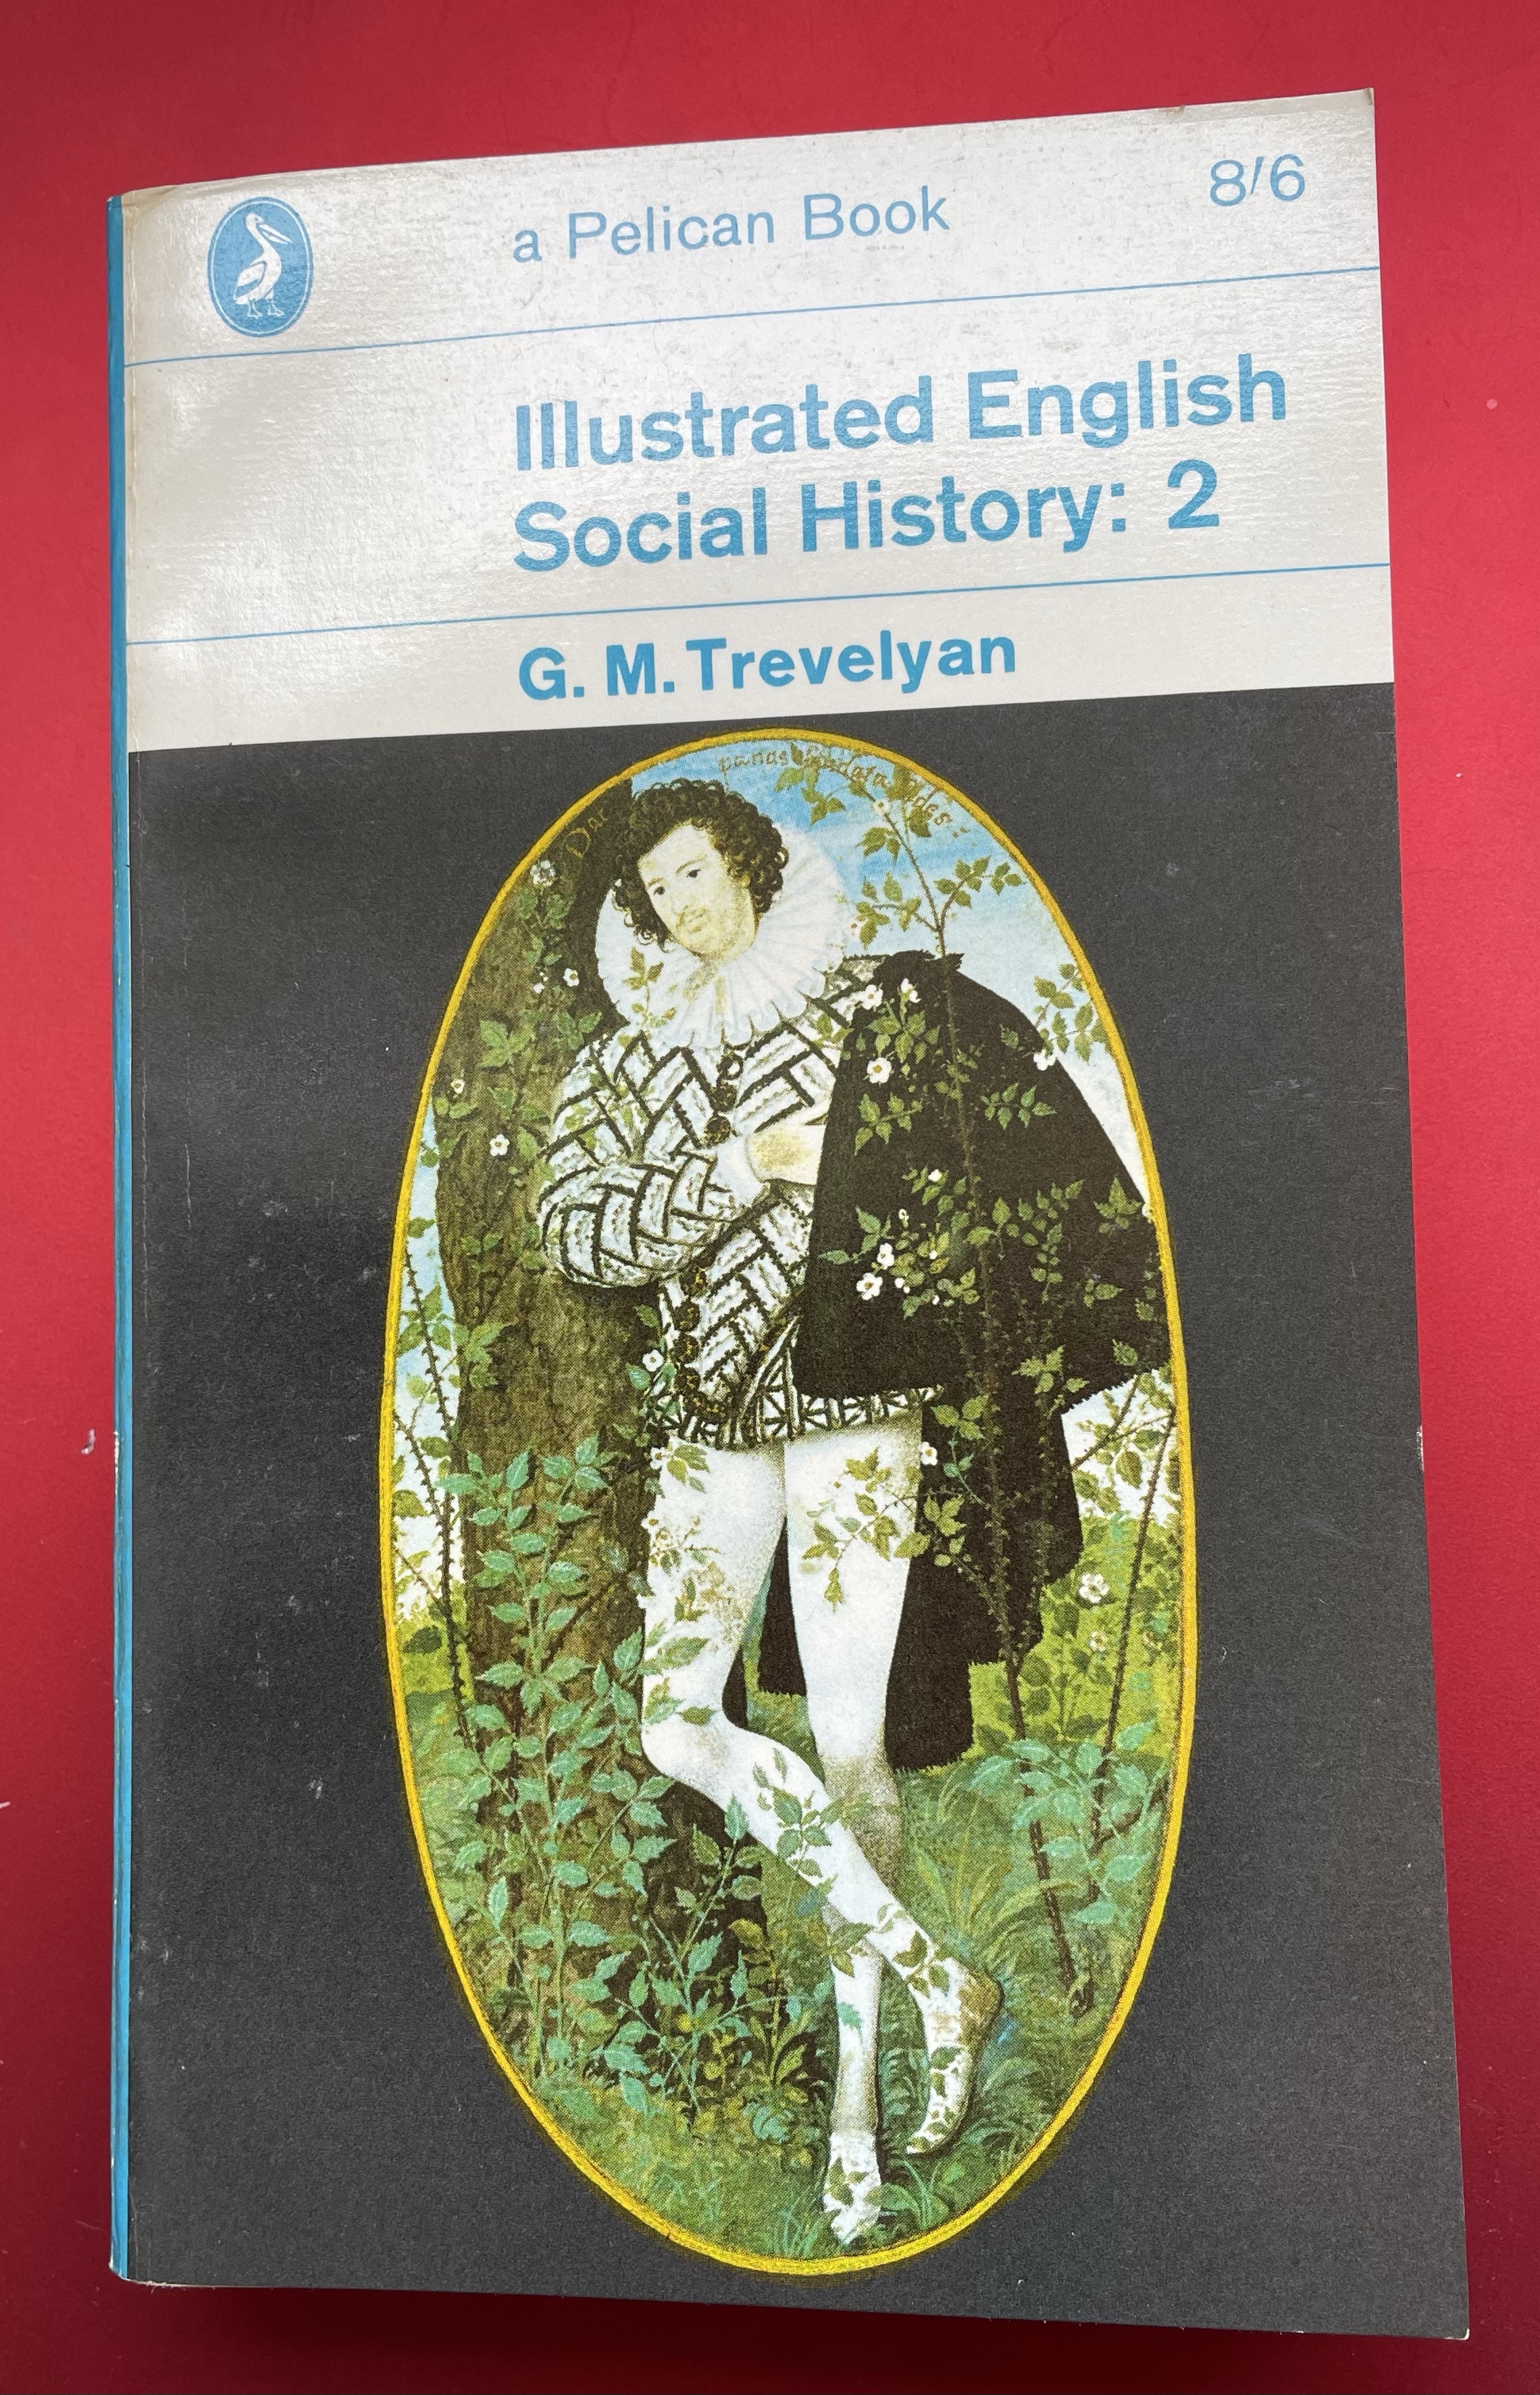 Cover of Illustrated English Social History 2 by GM Trevelyan